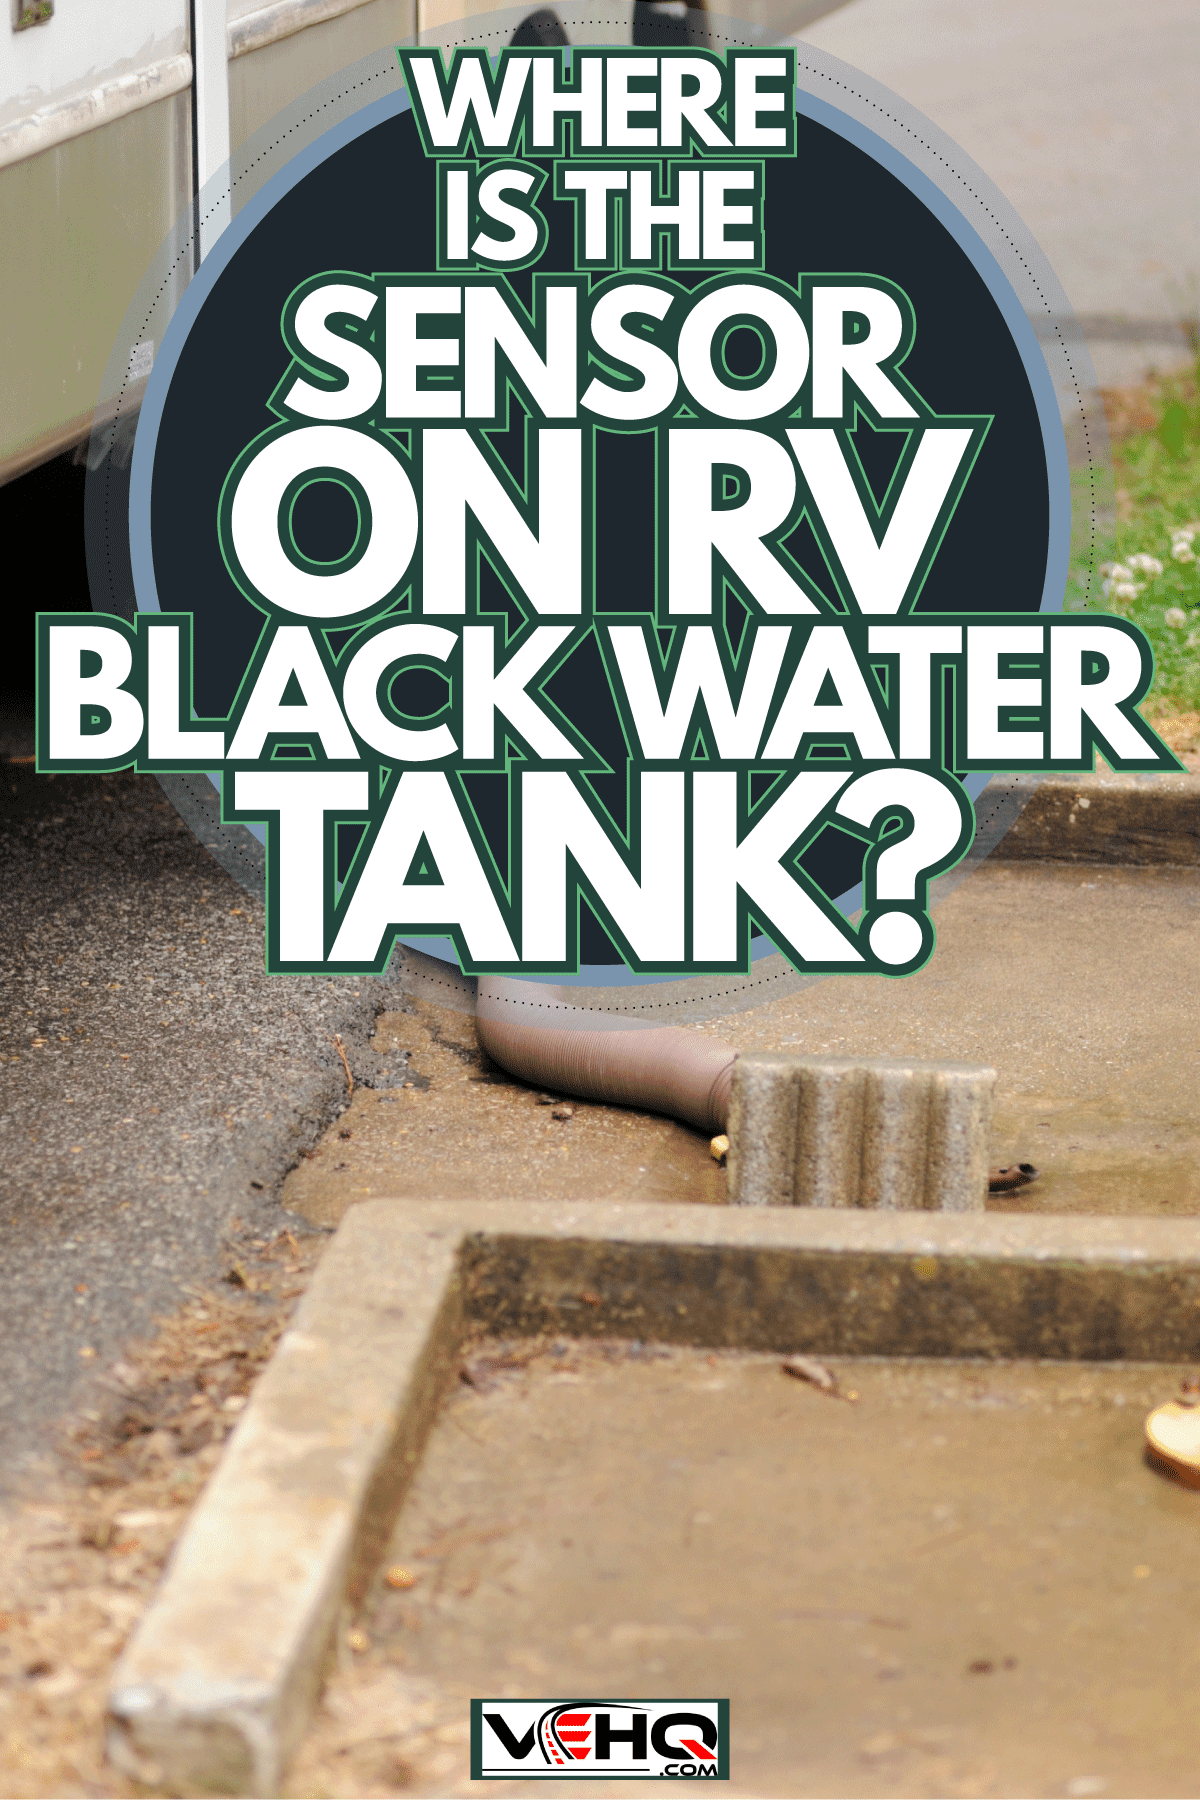 An RV dumping its black water tank on the drainage, Where Is The Sensor On RV Black Water Tank?